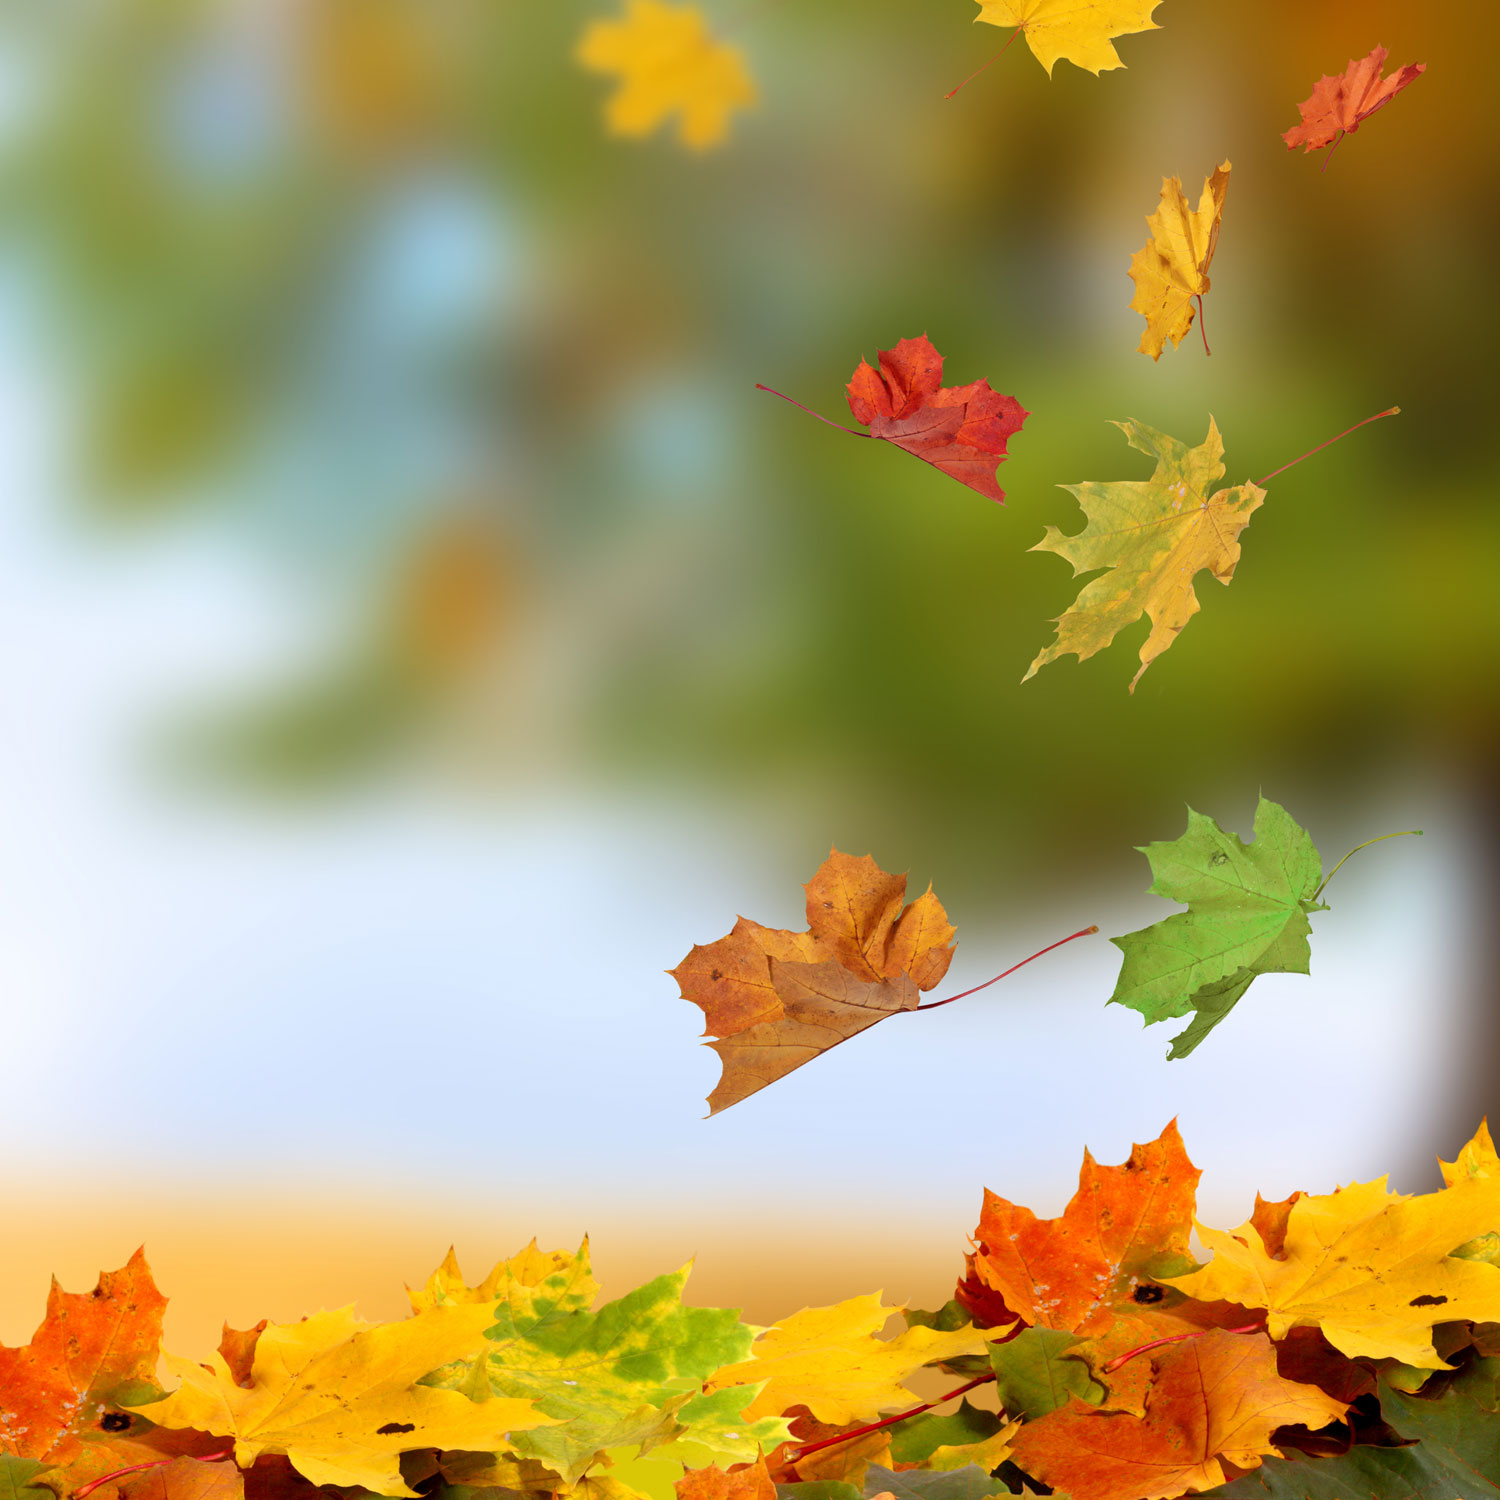 Maple Leaves Falling - Fall Leaves In The Air - HD Wallpaper 